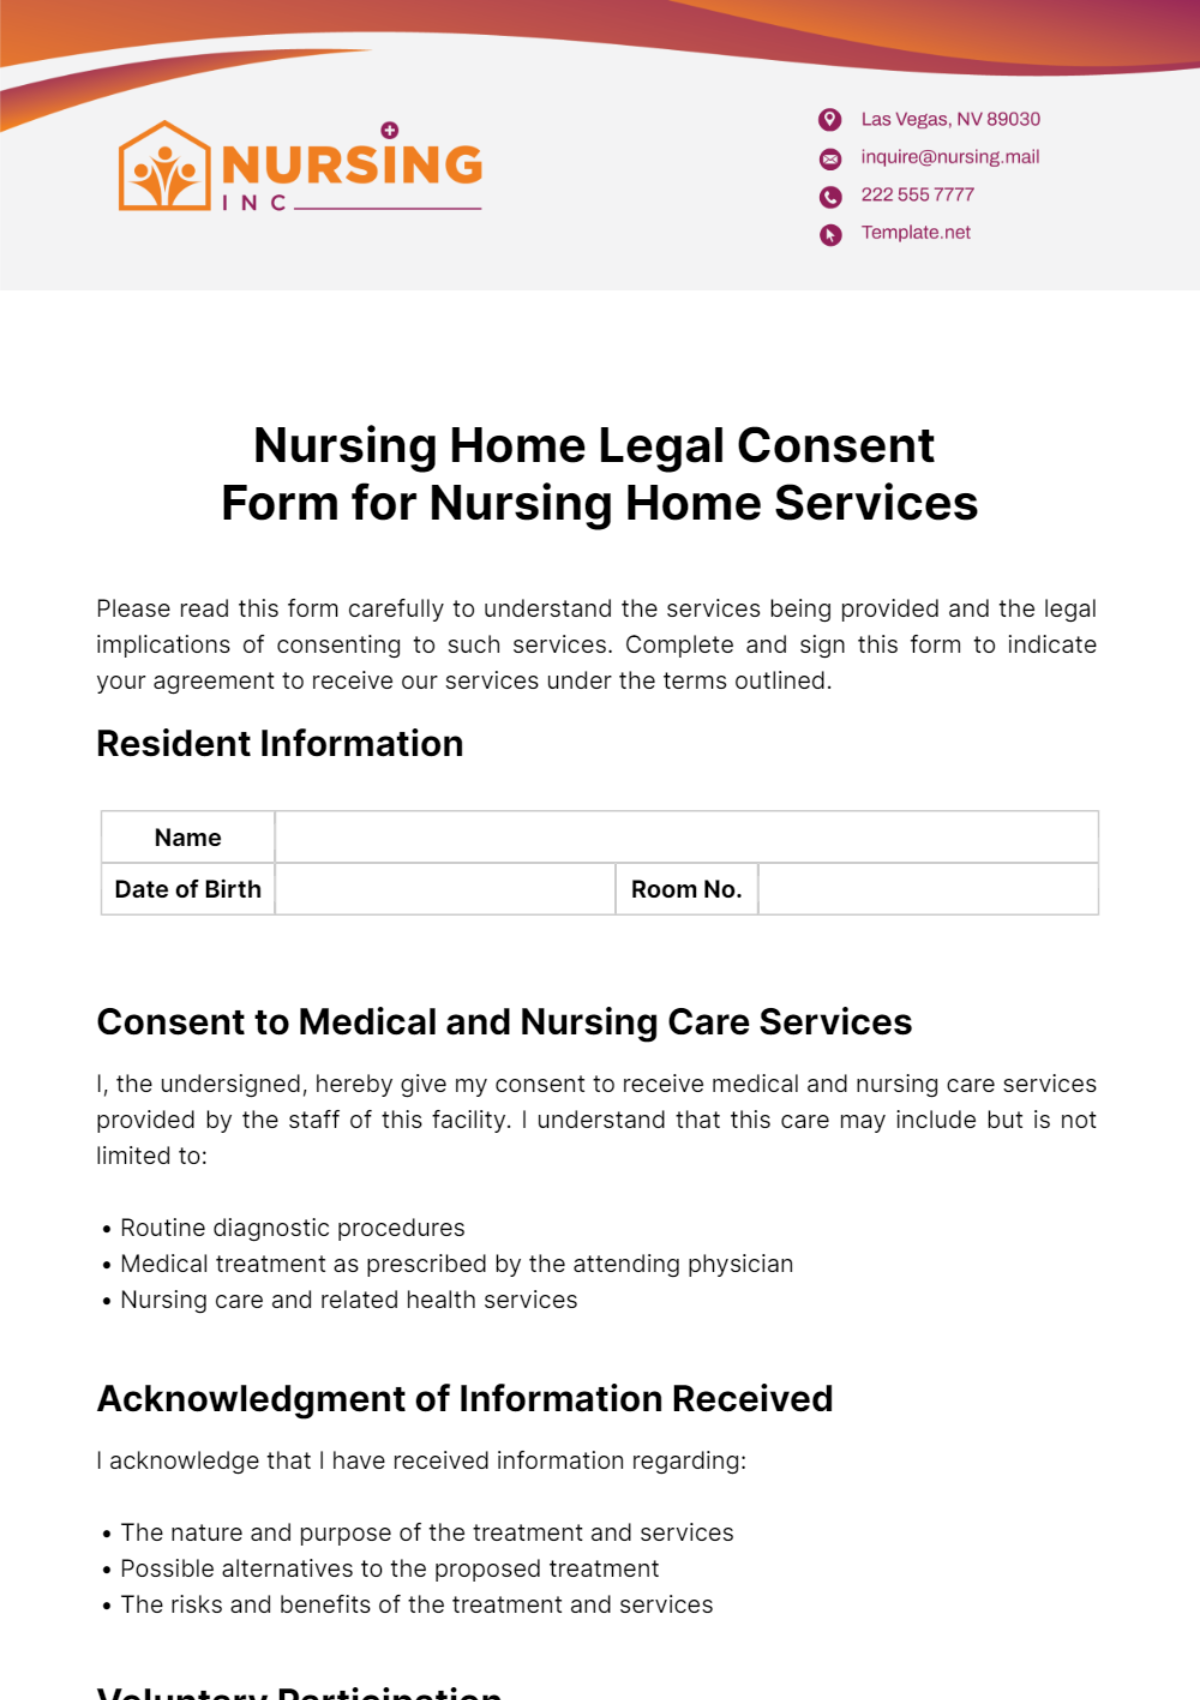 Free Nursing Home Legal Consent Forms for Nursing Home Services Template